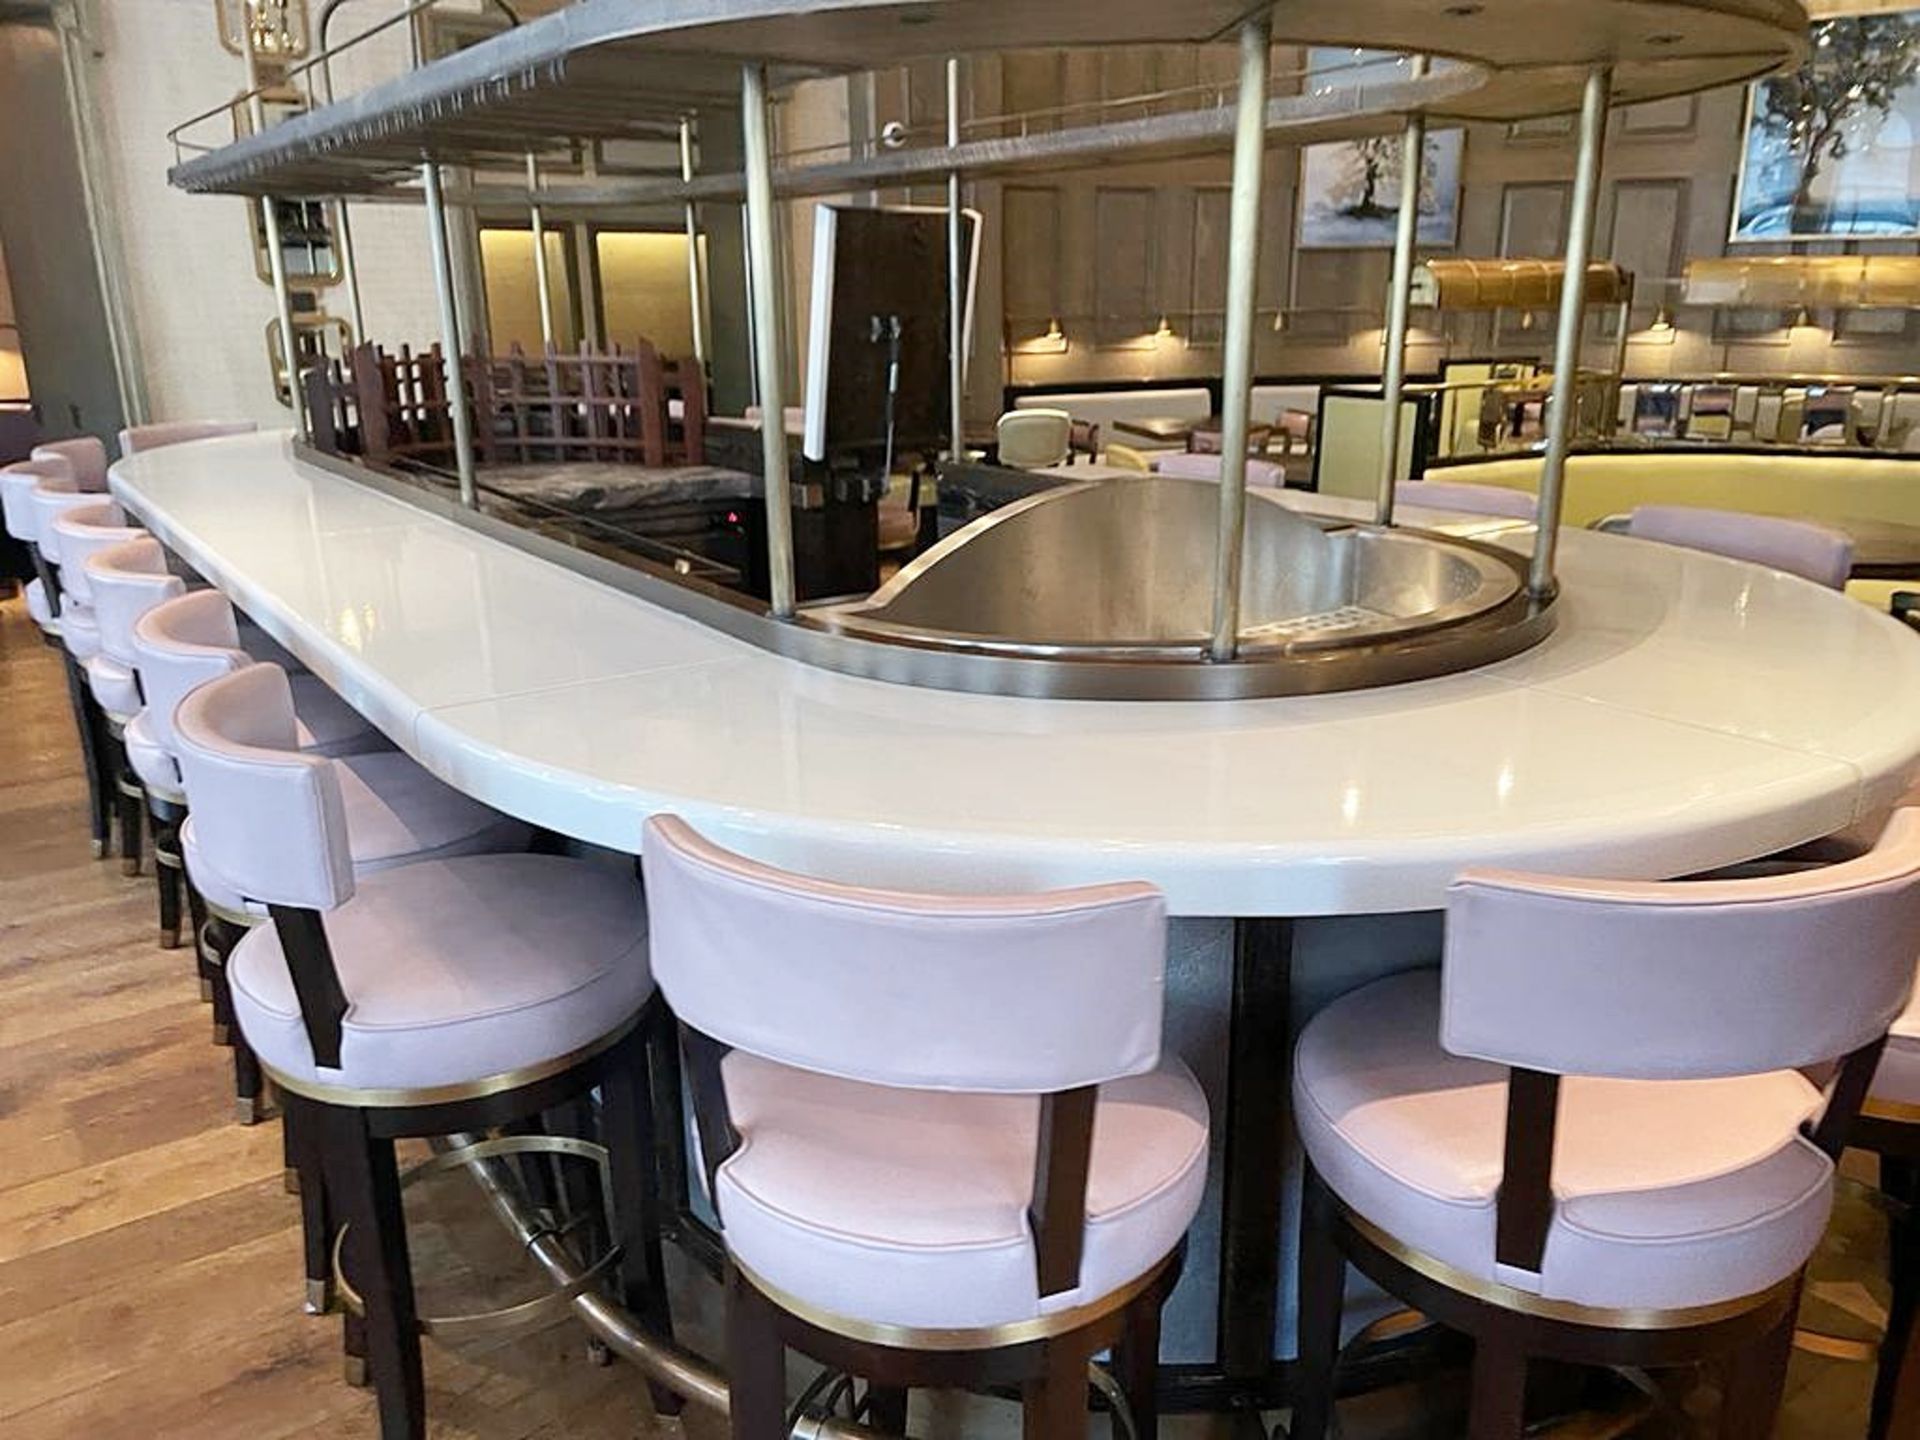 1 x Luxury Curved Restaurant 5.5-Metre Centrepiece Bar, Clad in Timber & Leather with 18 x Stools - Image 2 of 72